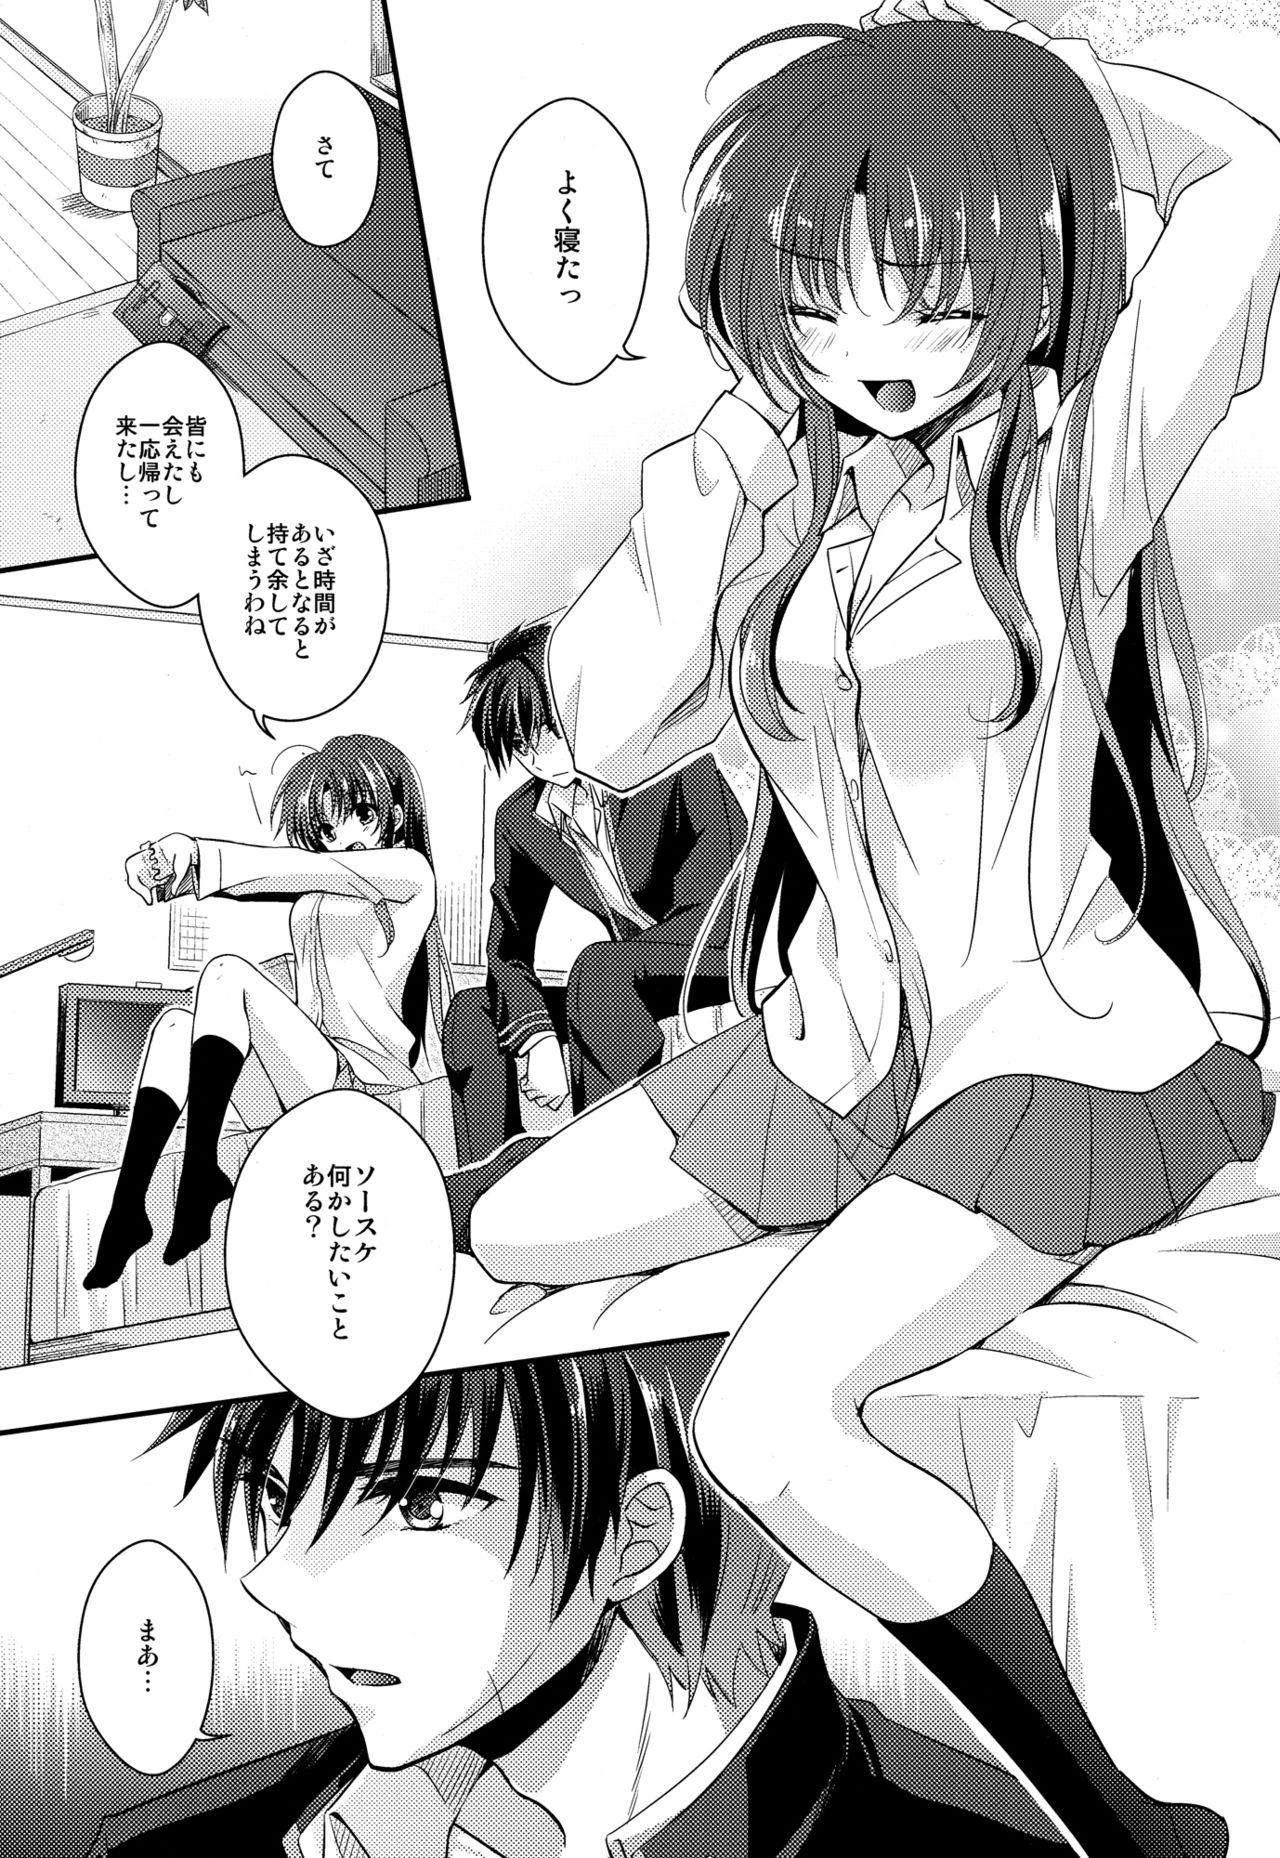 Outside Melting Sunny Lolipop - Full metal panic Youporn - Page 7